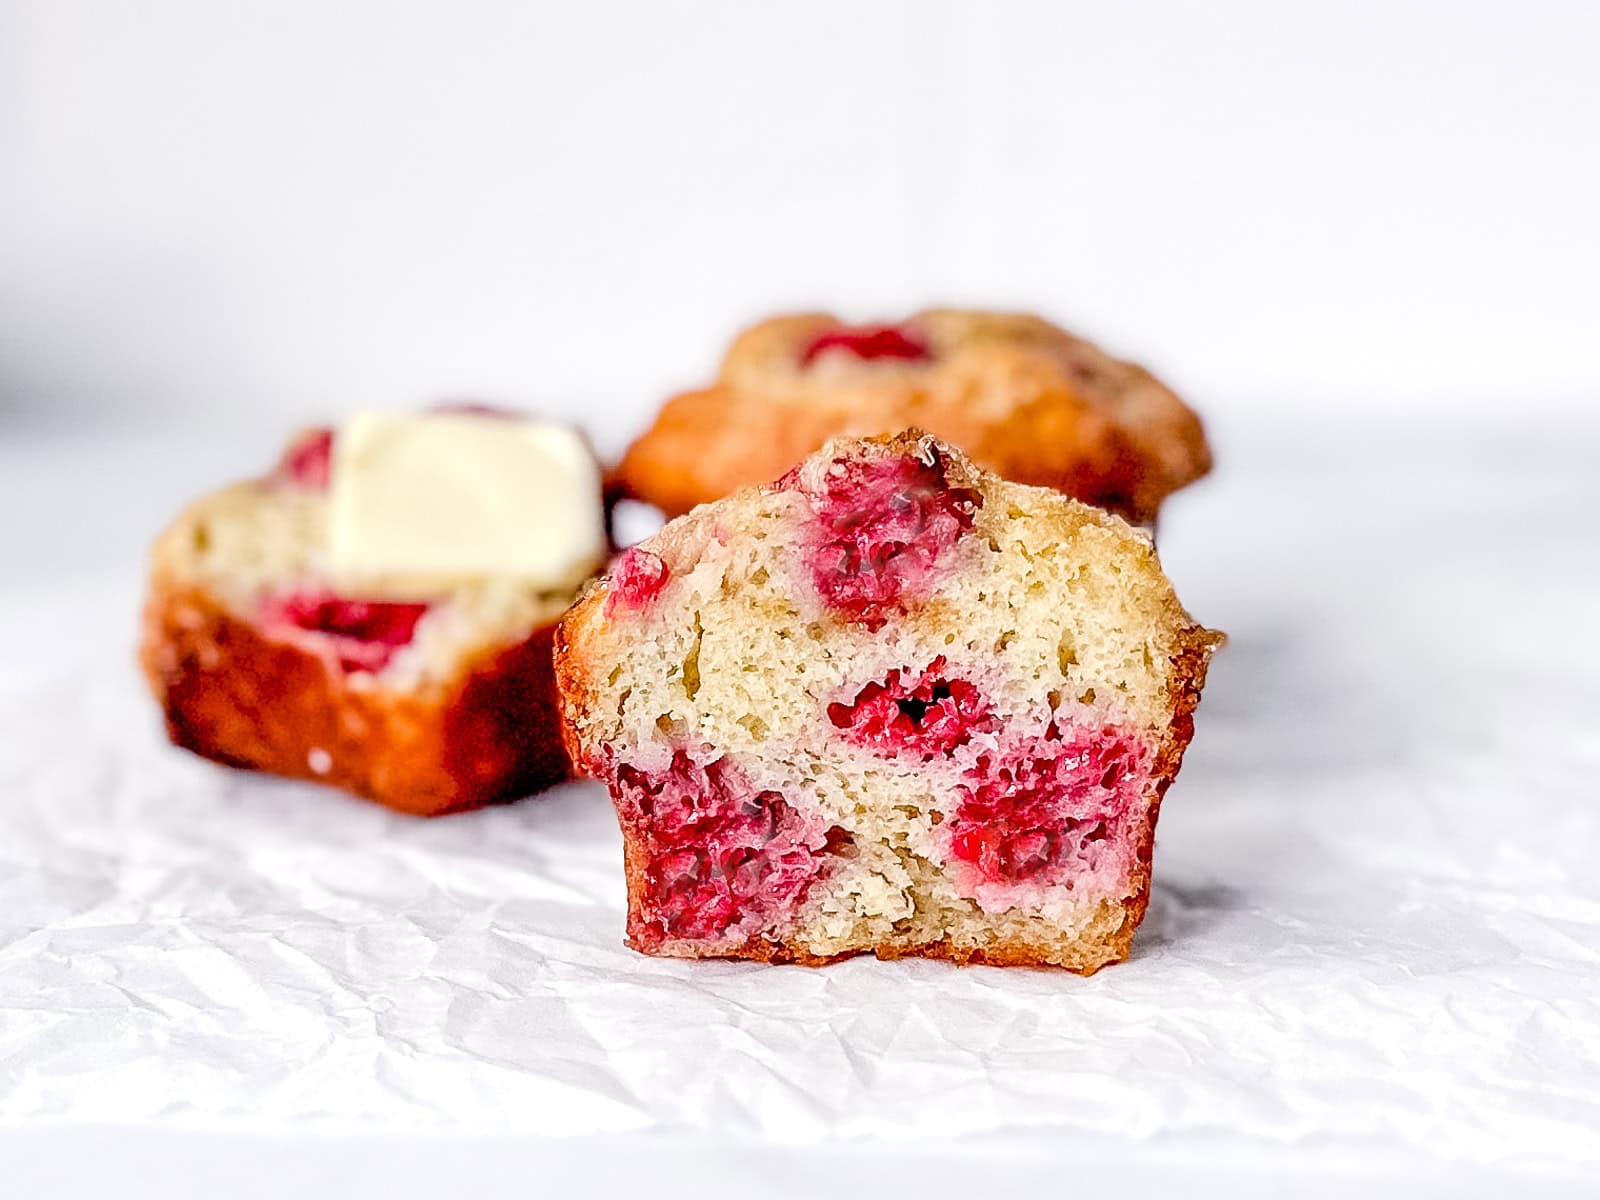 A raspberry banana muffin on a white background.